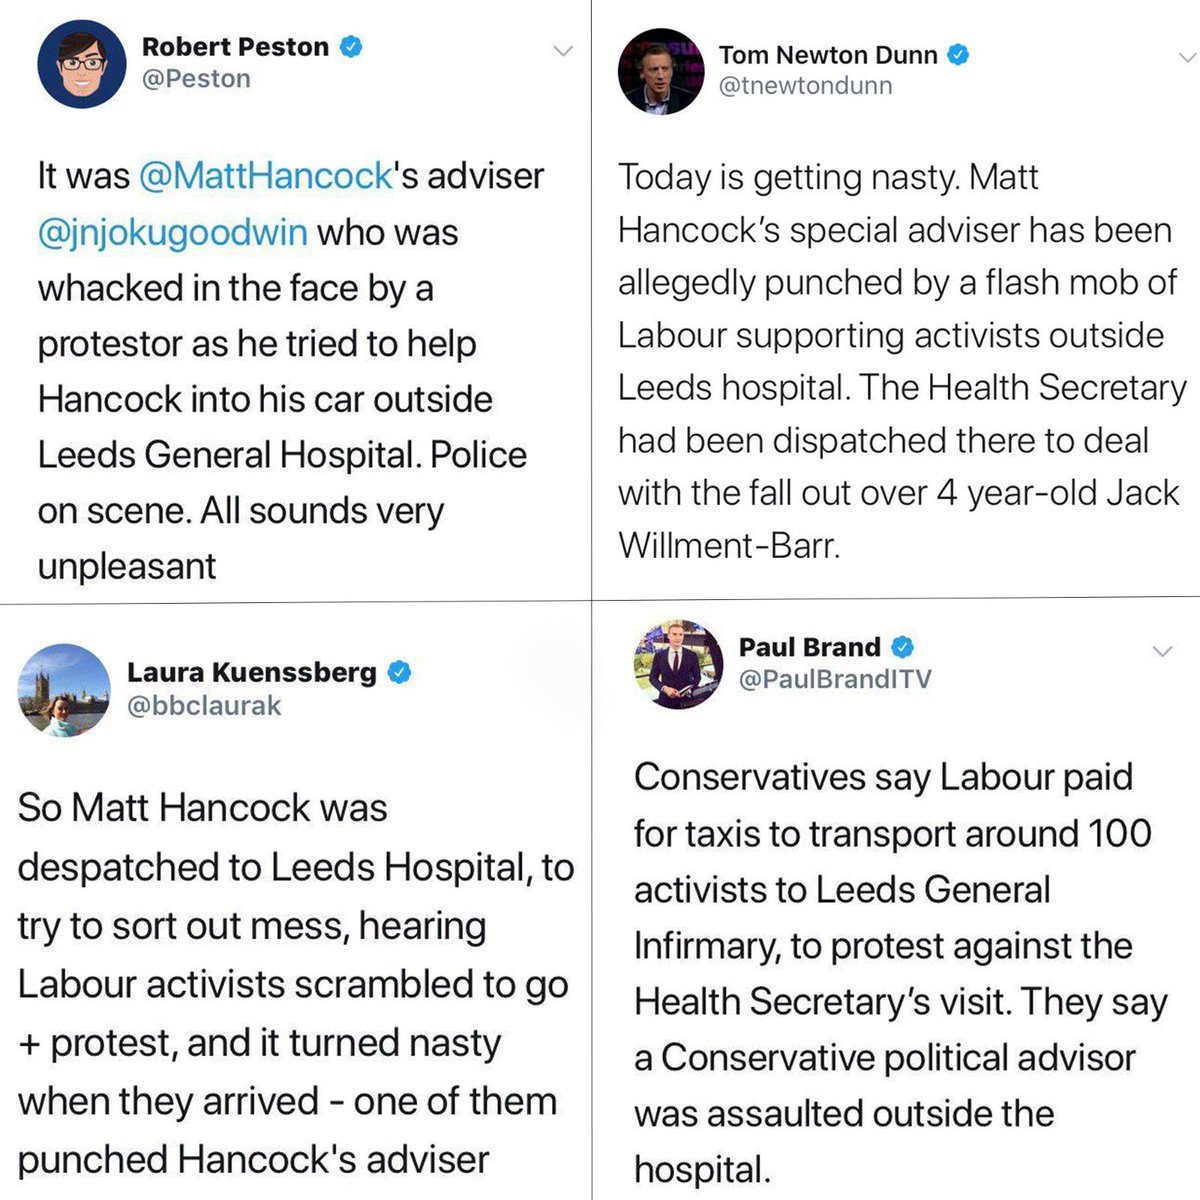 This never happened. Invented by the Tories to divert your attention from a child having to lie on a hospital floor; reported by media that didn’t bother to check if it was true. This is what media bias looks like.